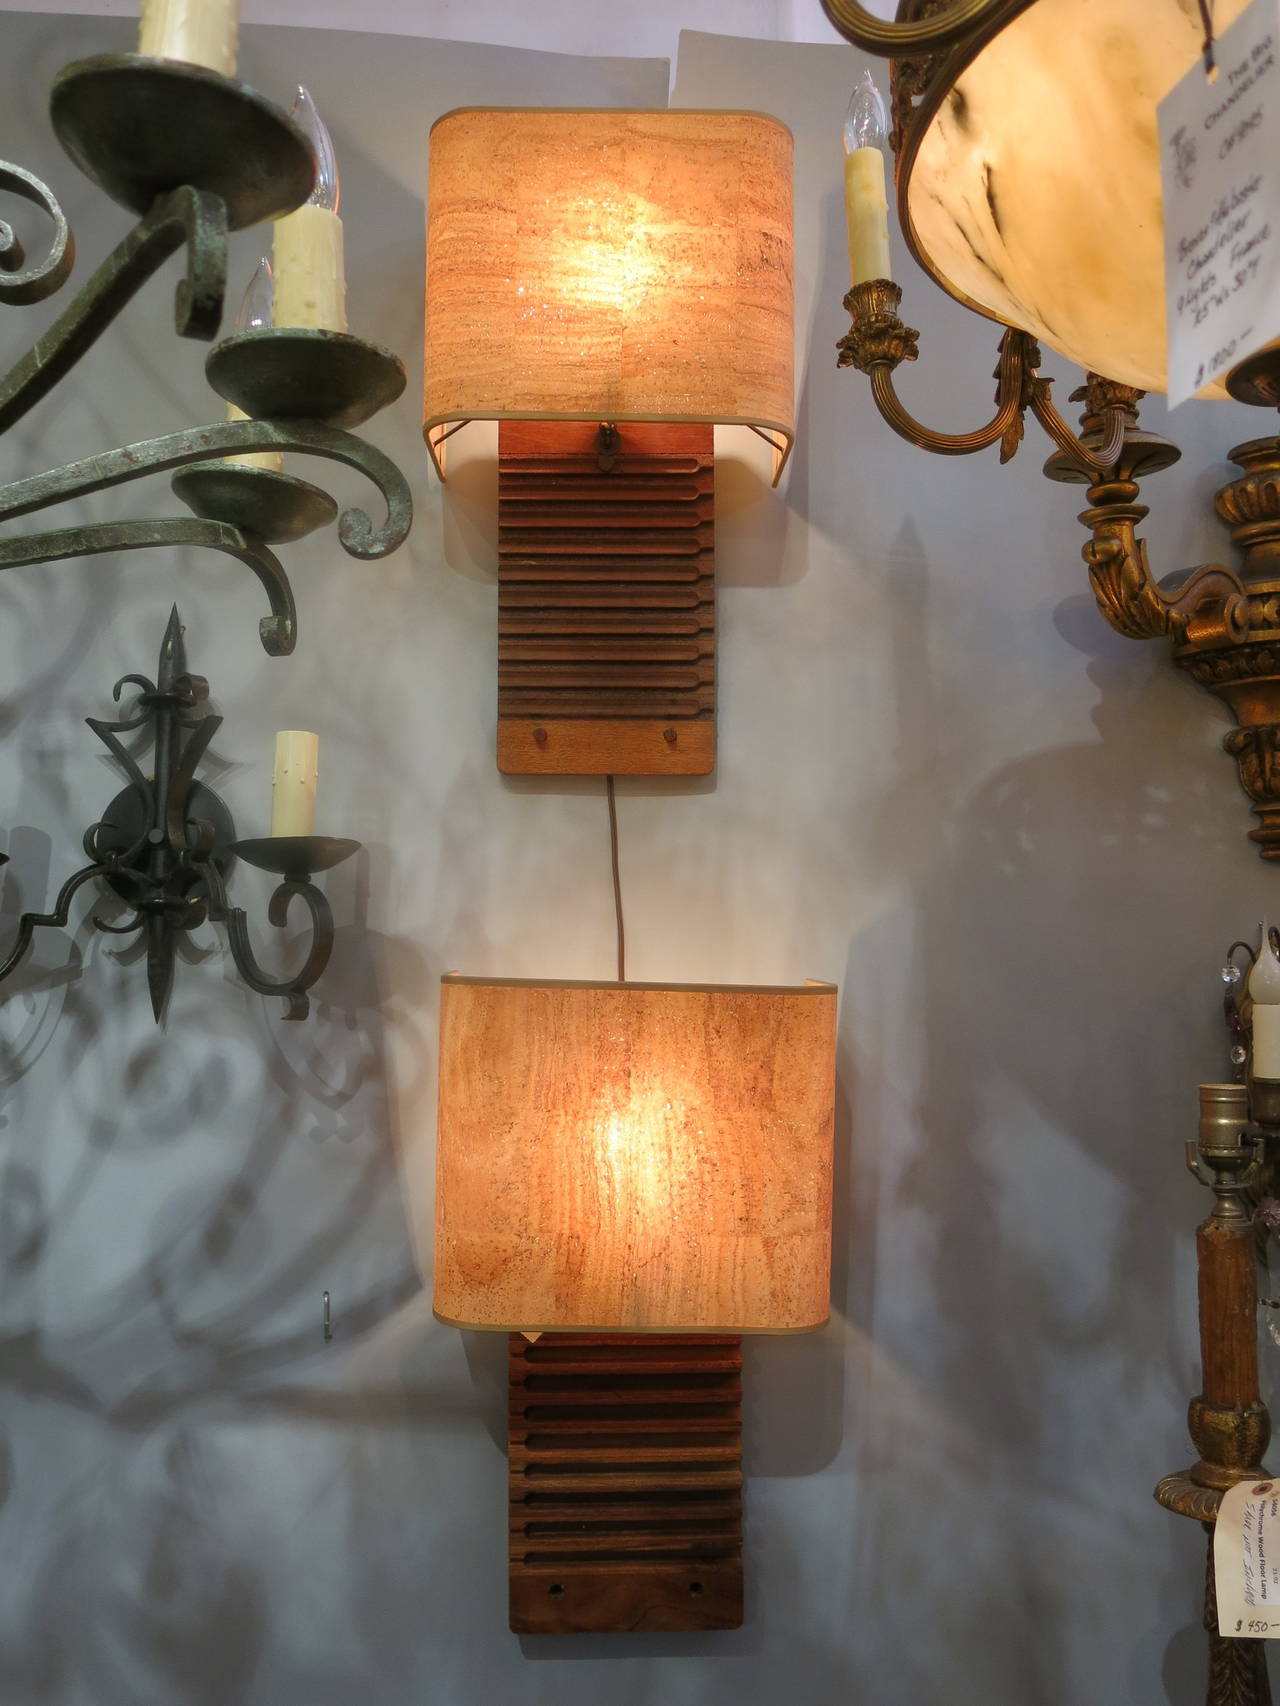 Pair of Vintage Wood Cigar Mold Sconces with Cork Shades